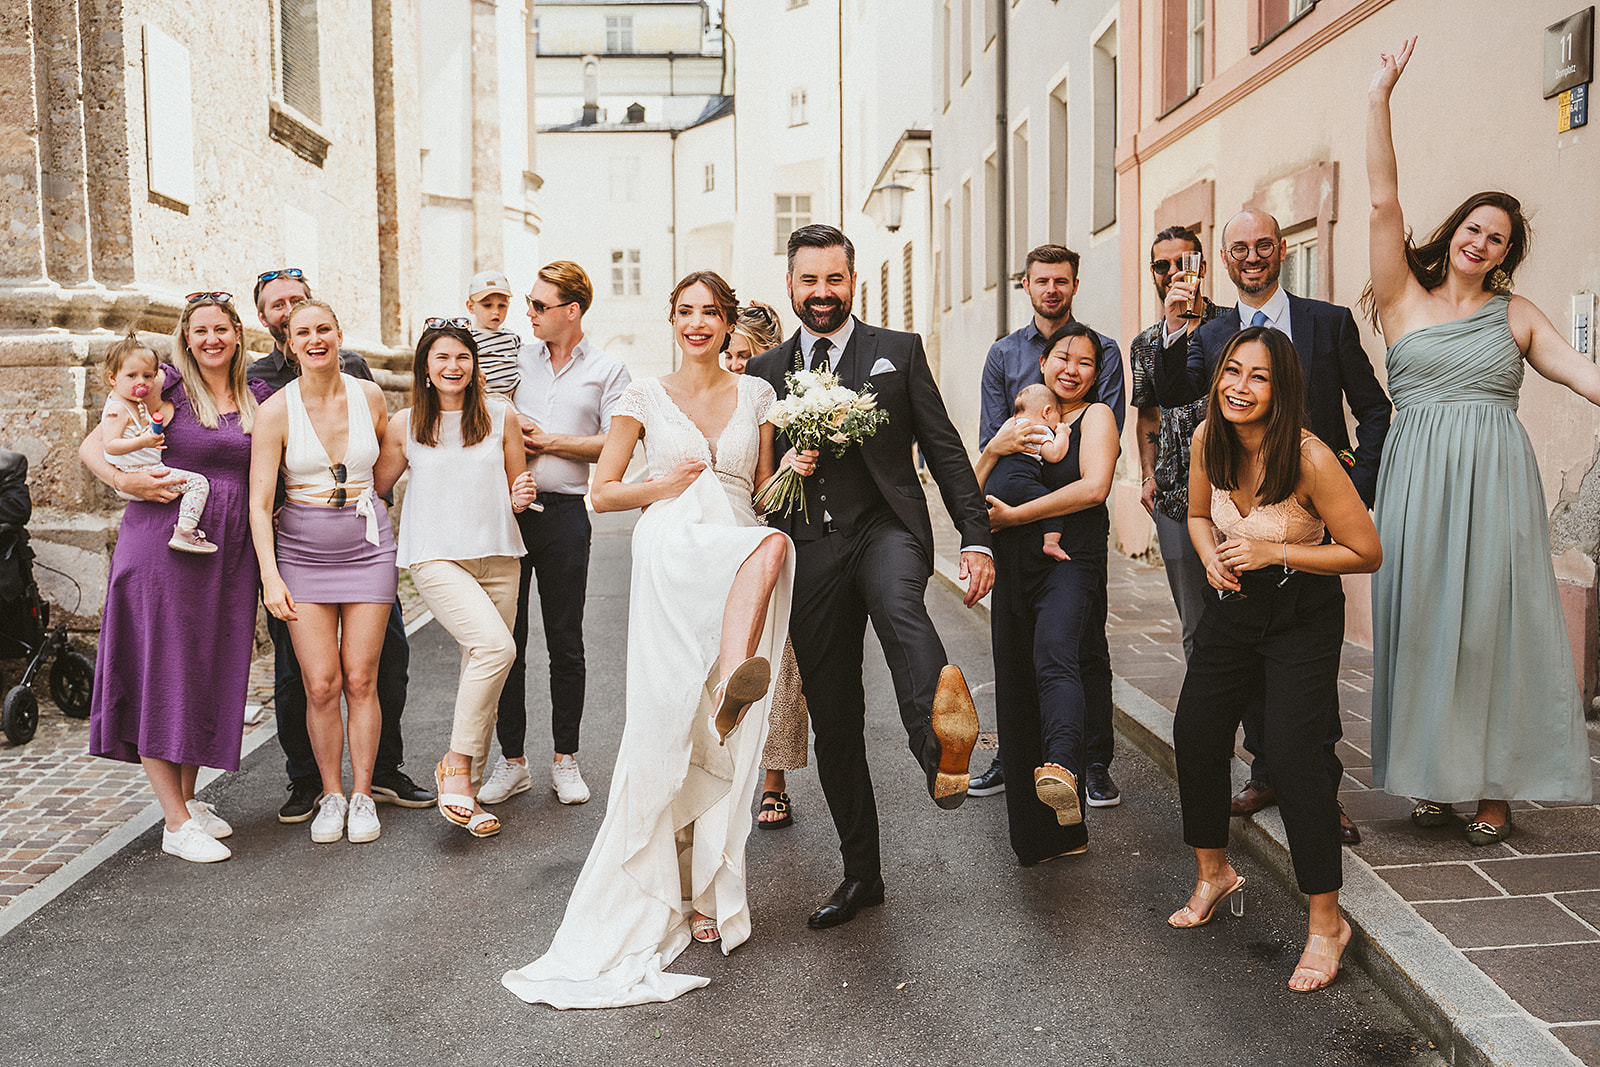 Group picture of wedding guests in the old town in city of Innsbruck in the Tyrol